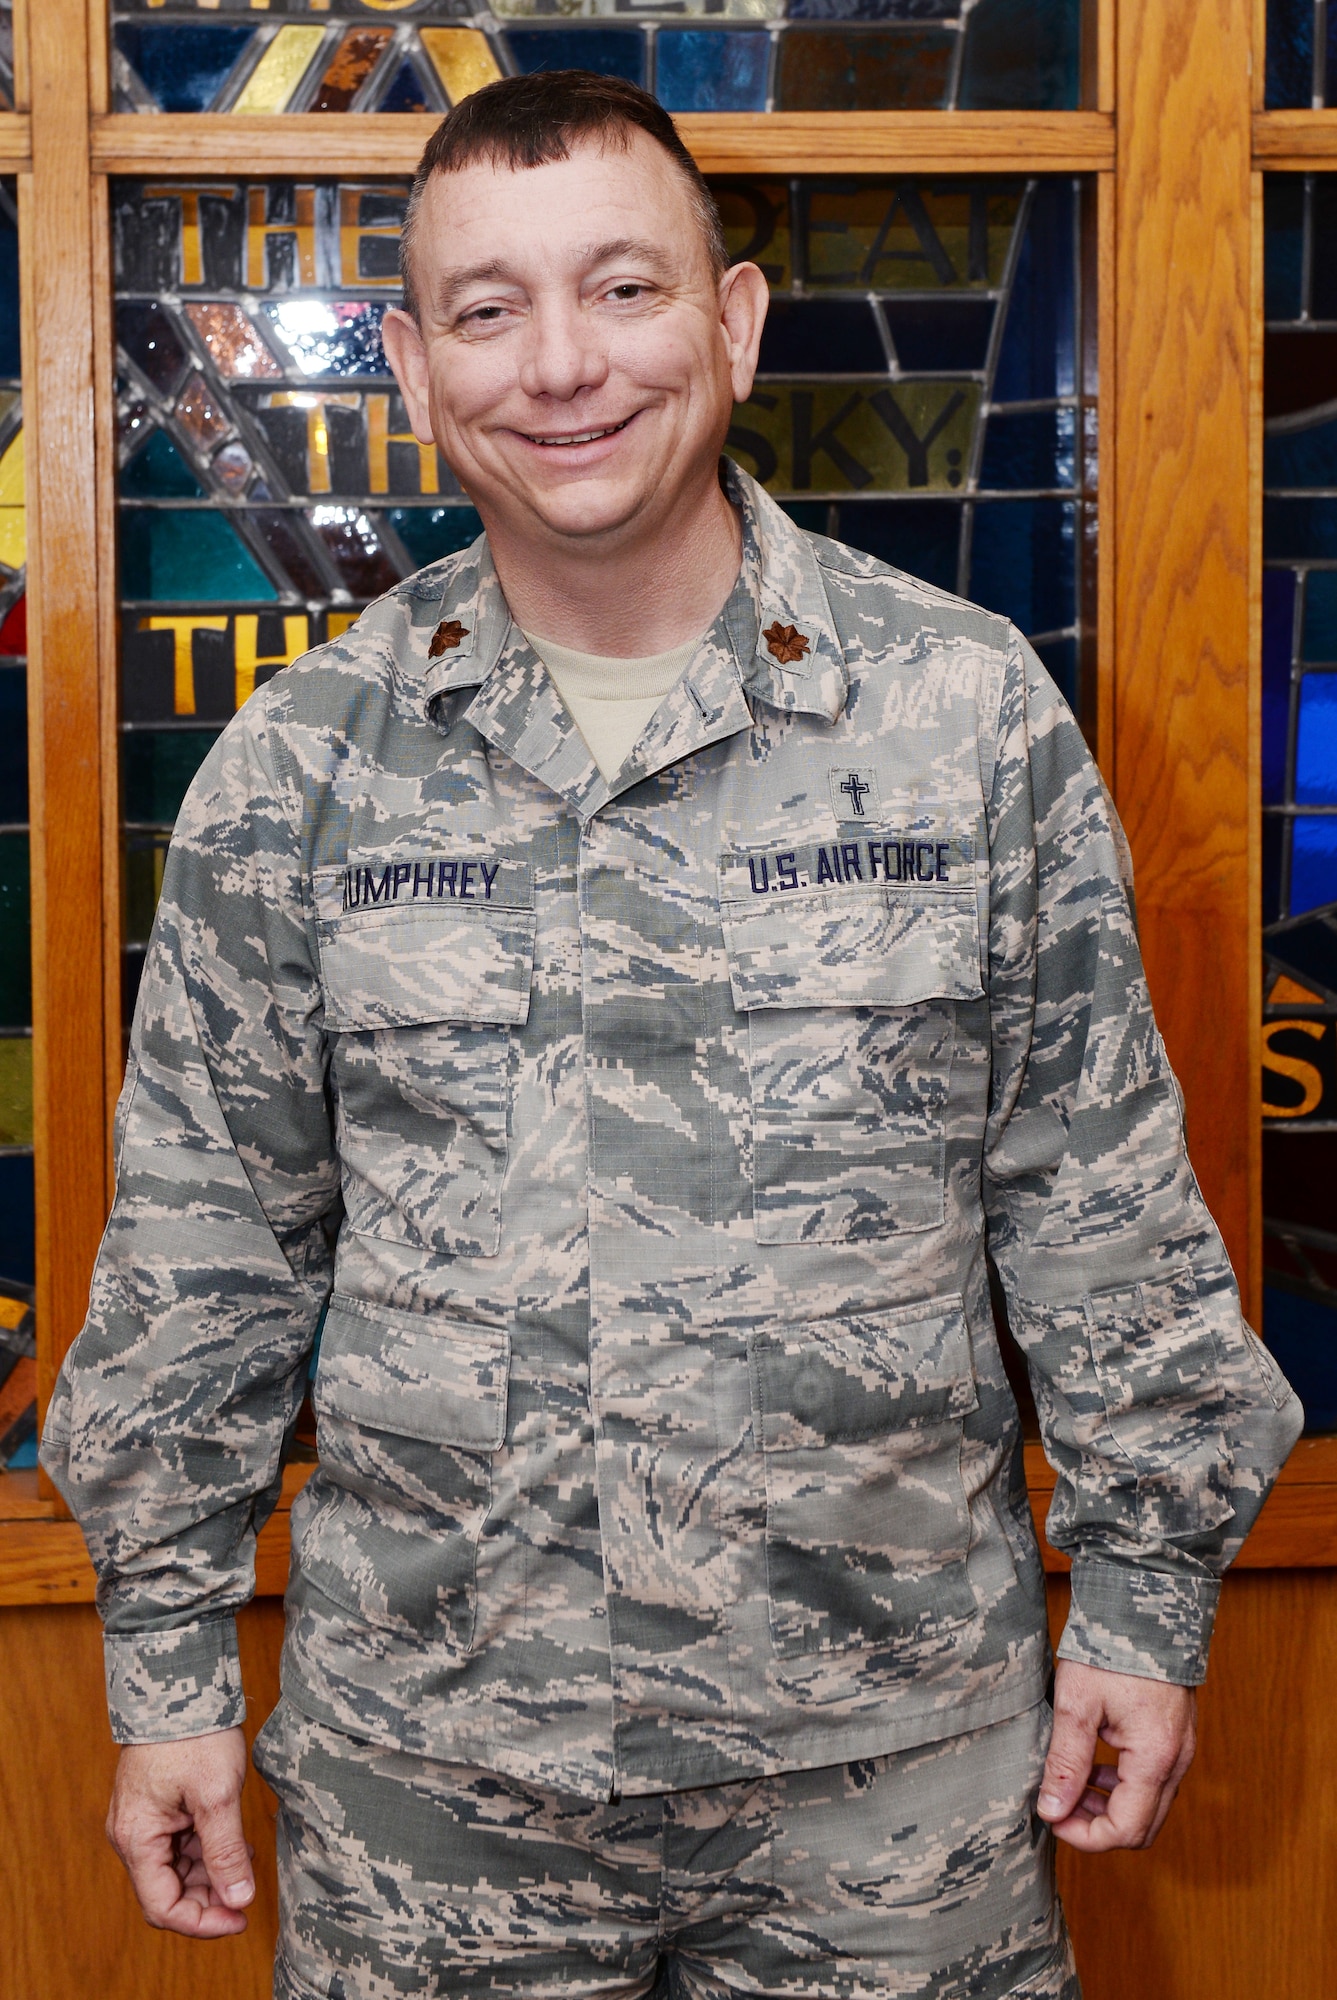 Chaplain (Maj.) Kevin Humphrey, 55th Wing Chapel poses for a photo March 28, 2019, at Offutt Air Force Base, Nebraska, Strategic Air Command Chapel. (U.S. Air Force photo by Charles Haymond)